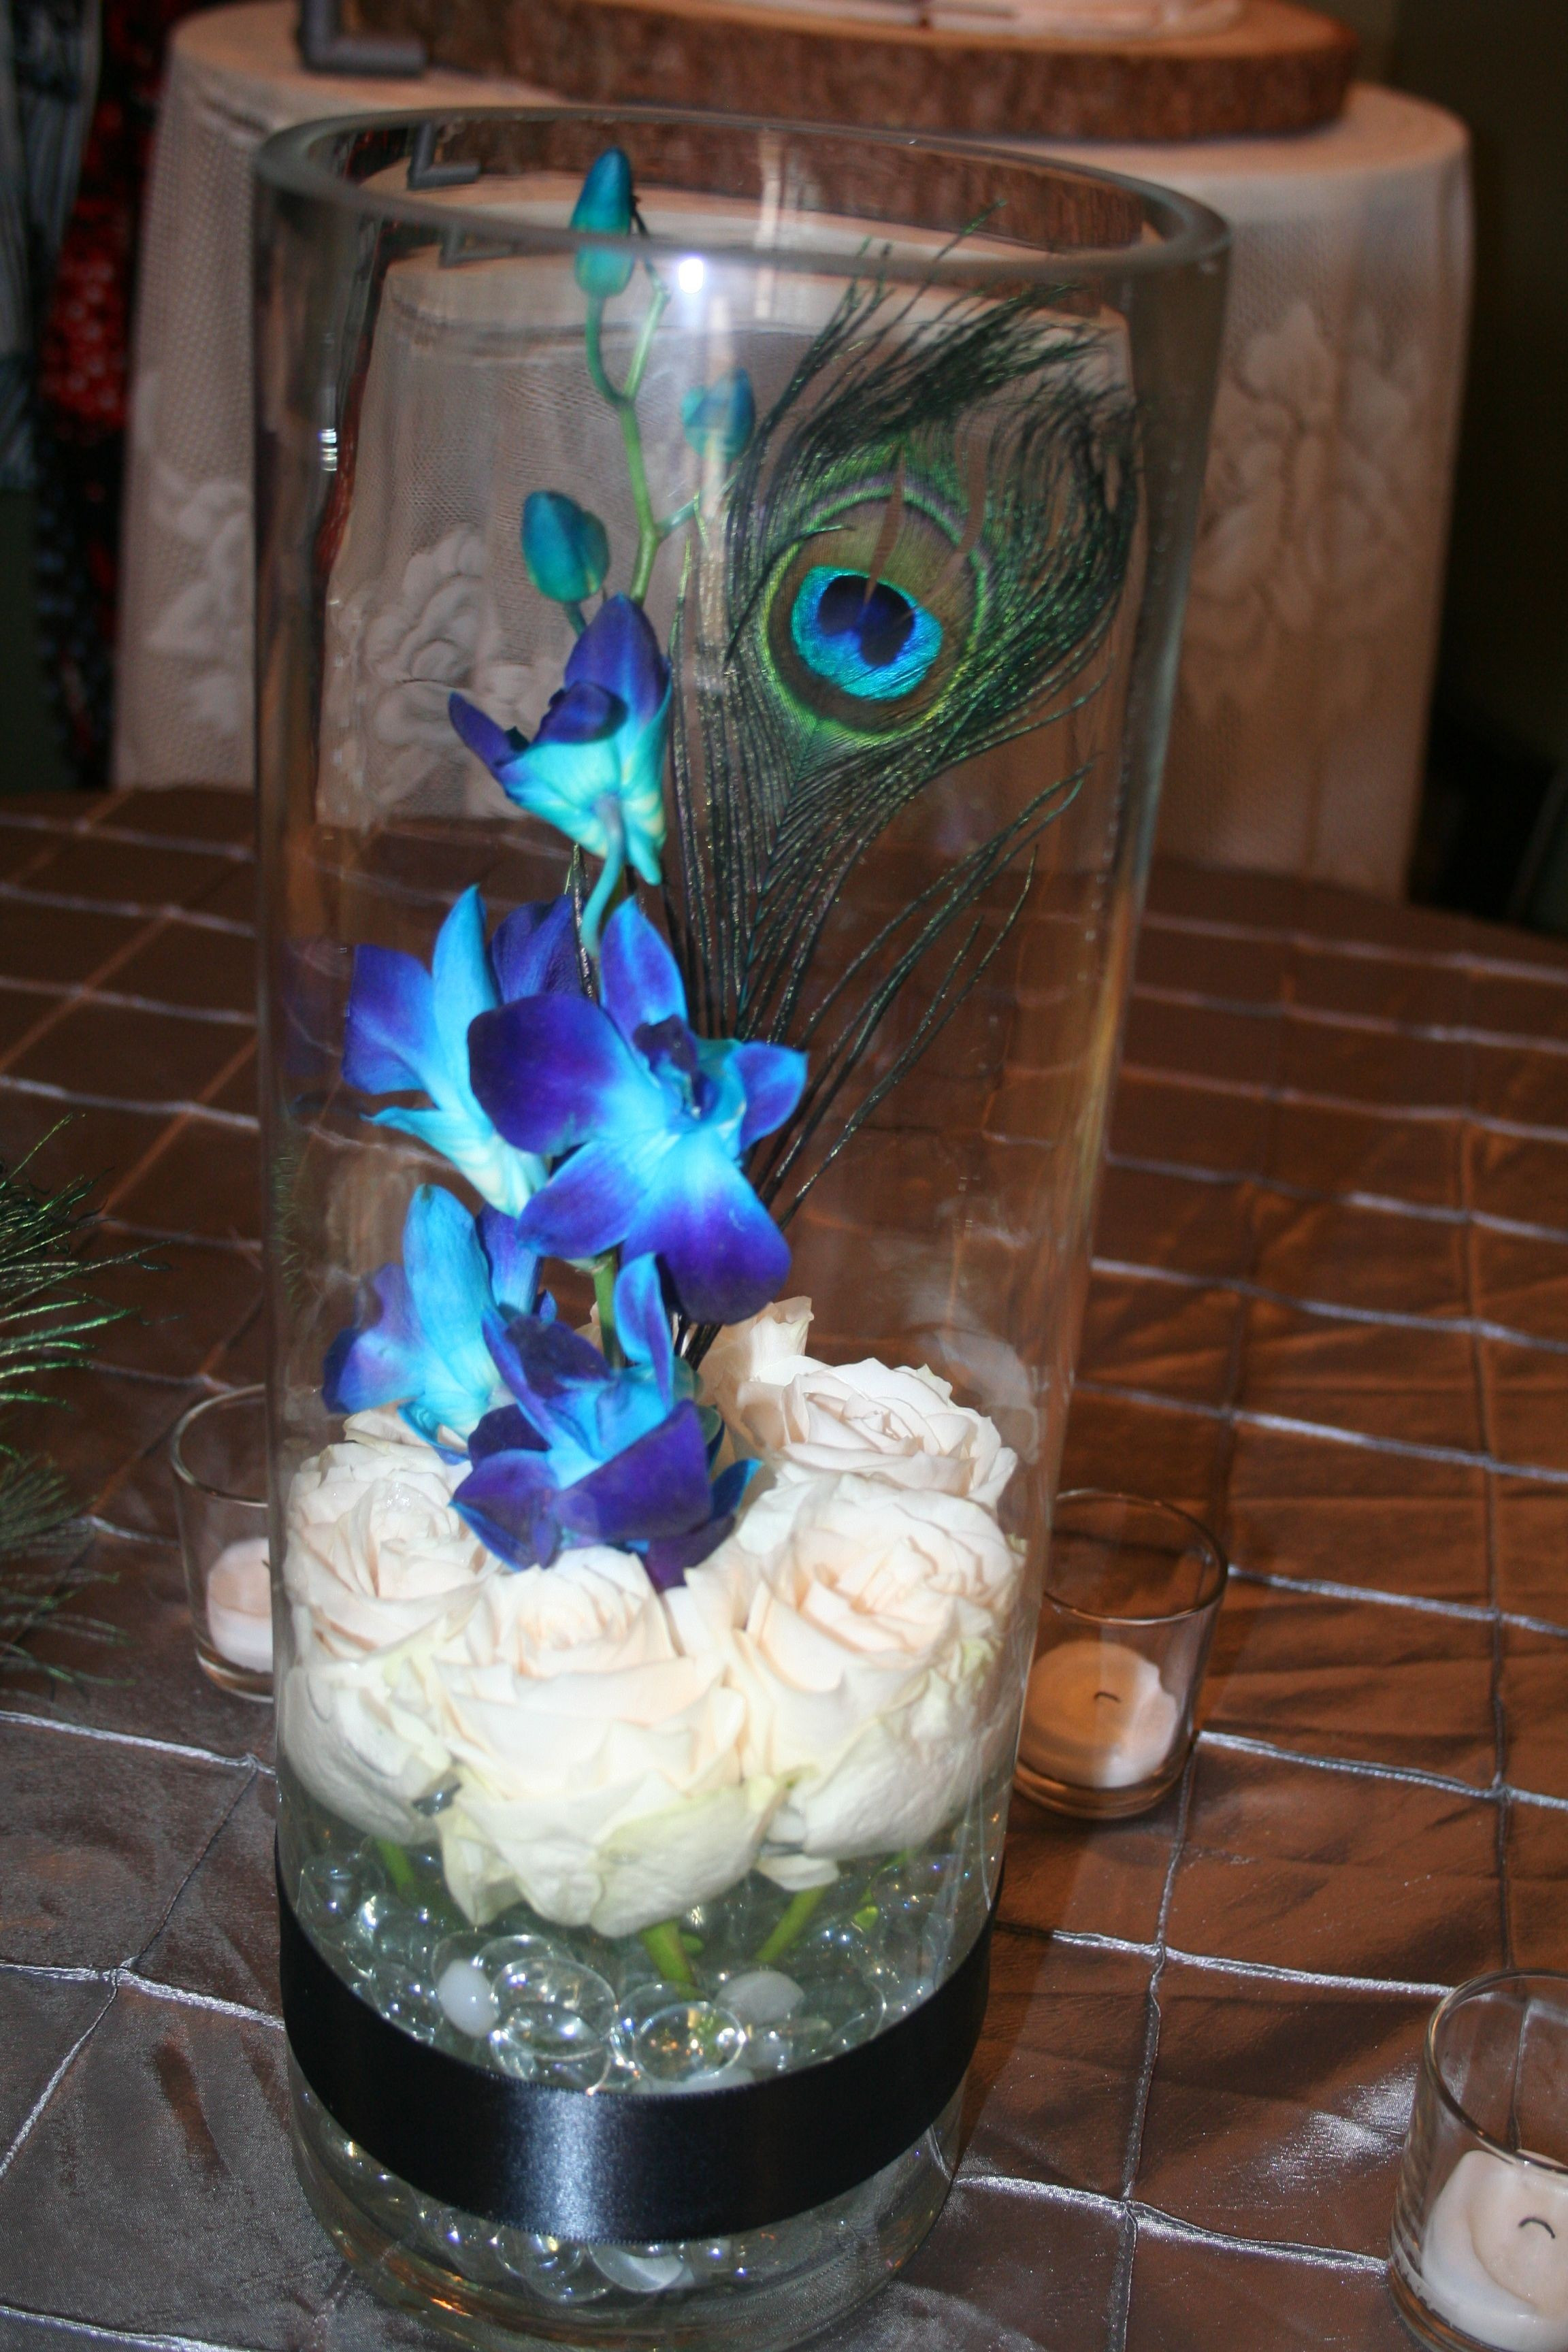 square glass vases wholesale of peacock wedding decorations cheap best of dsc h vases square inside peacock wedding decorations cheap new inexpensive centerpiece of a 15quot tall cylinder vase with white roses